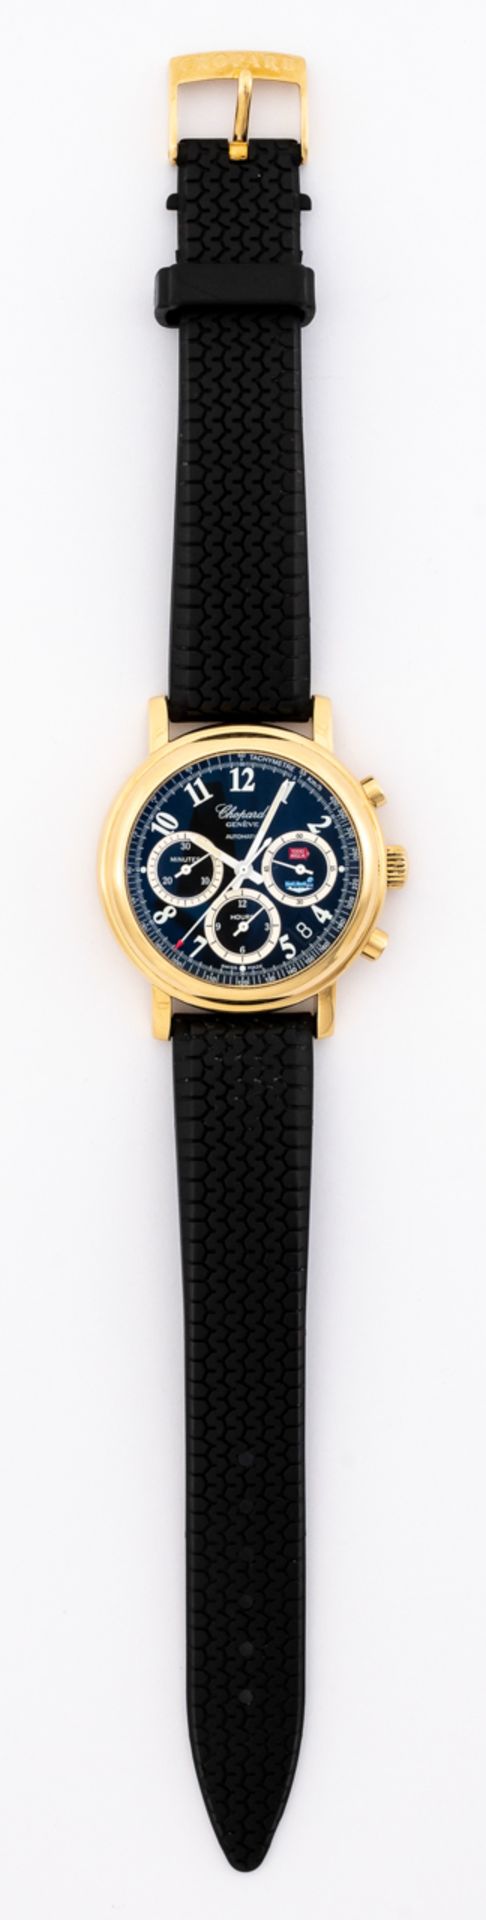 *CHOPARD MILLE MIGLIA CHRONOGRAPH - Image 2 of 3